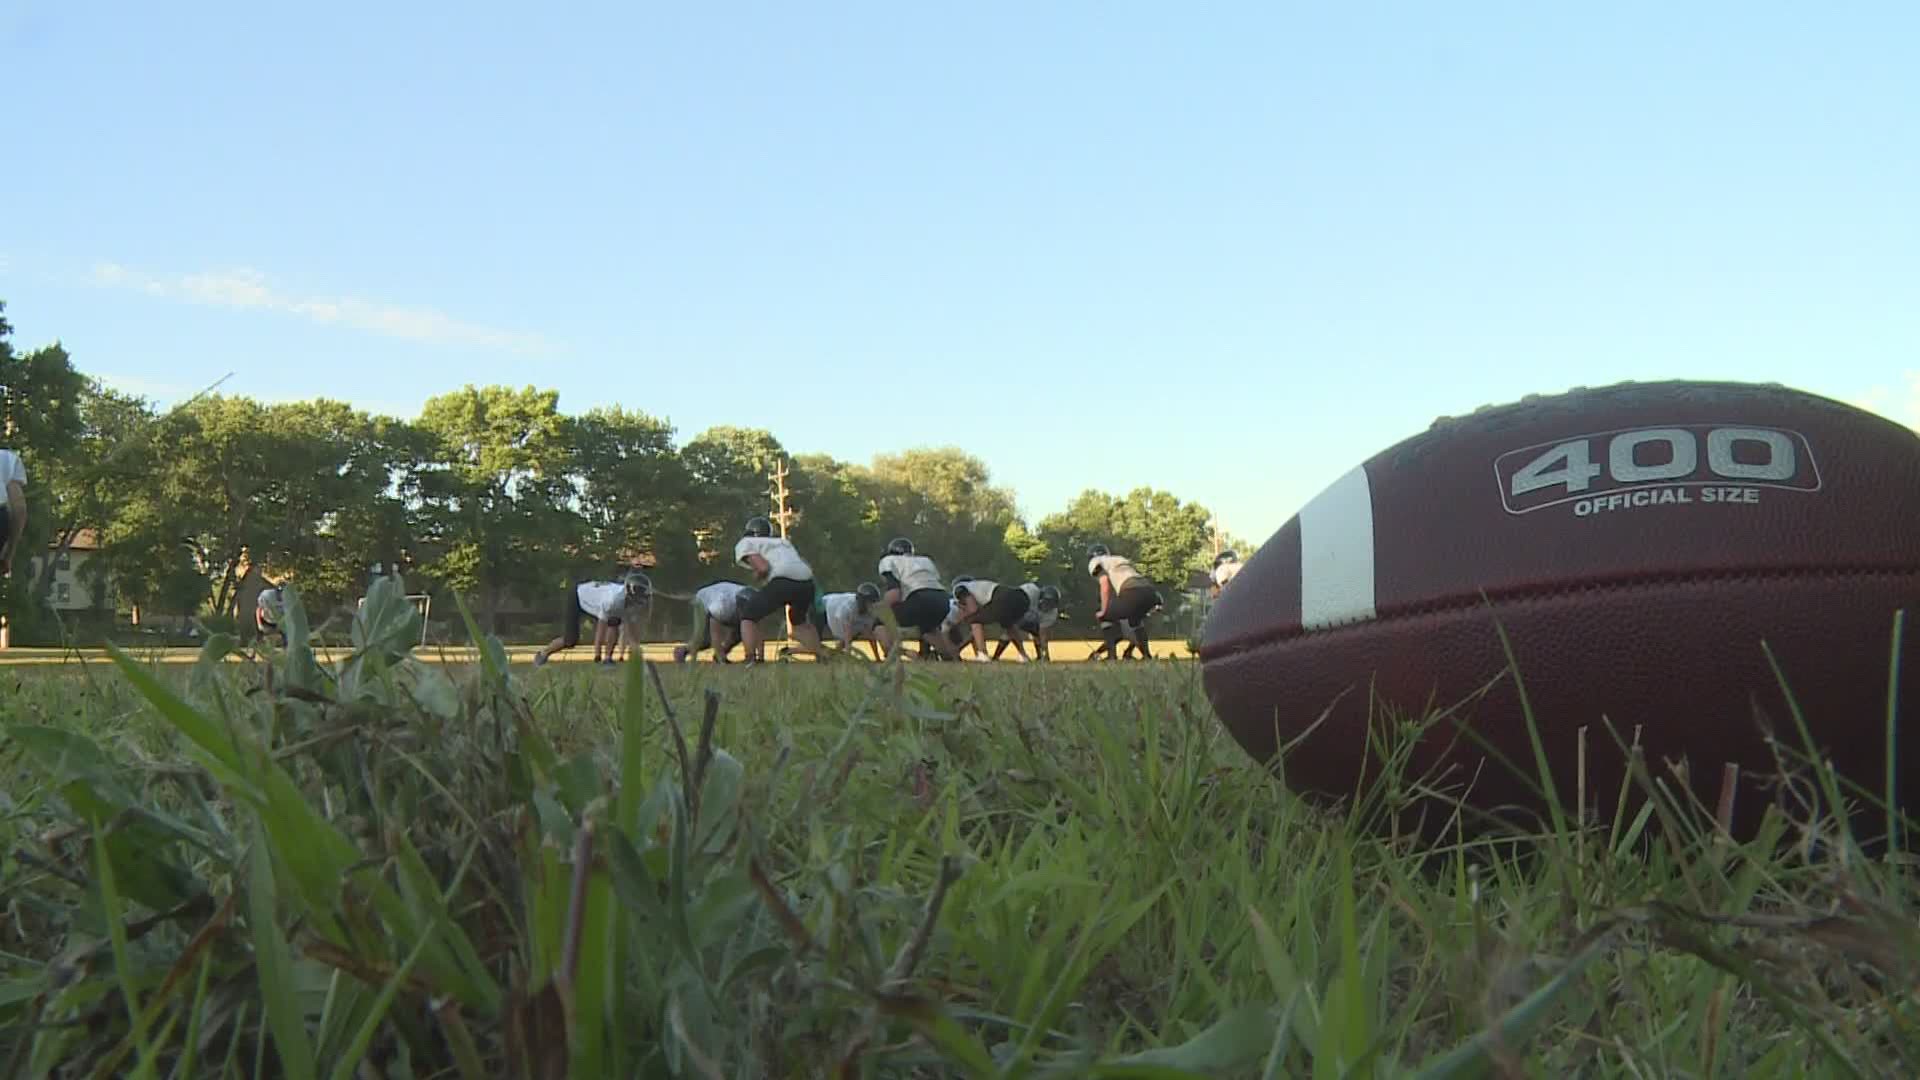 Falling outside of MHSAA jurisdiction, the Grand Valley Christian Patriots are preparing for their season opener on August 29th